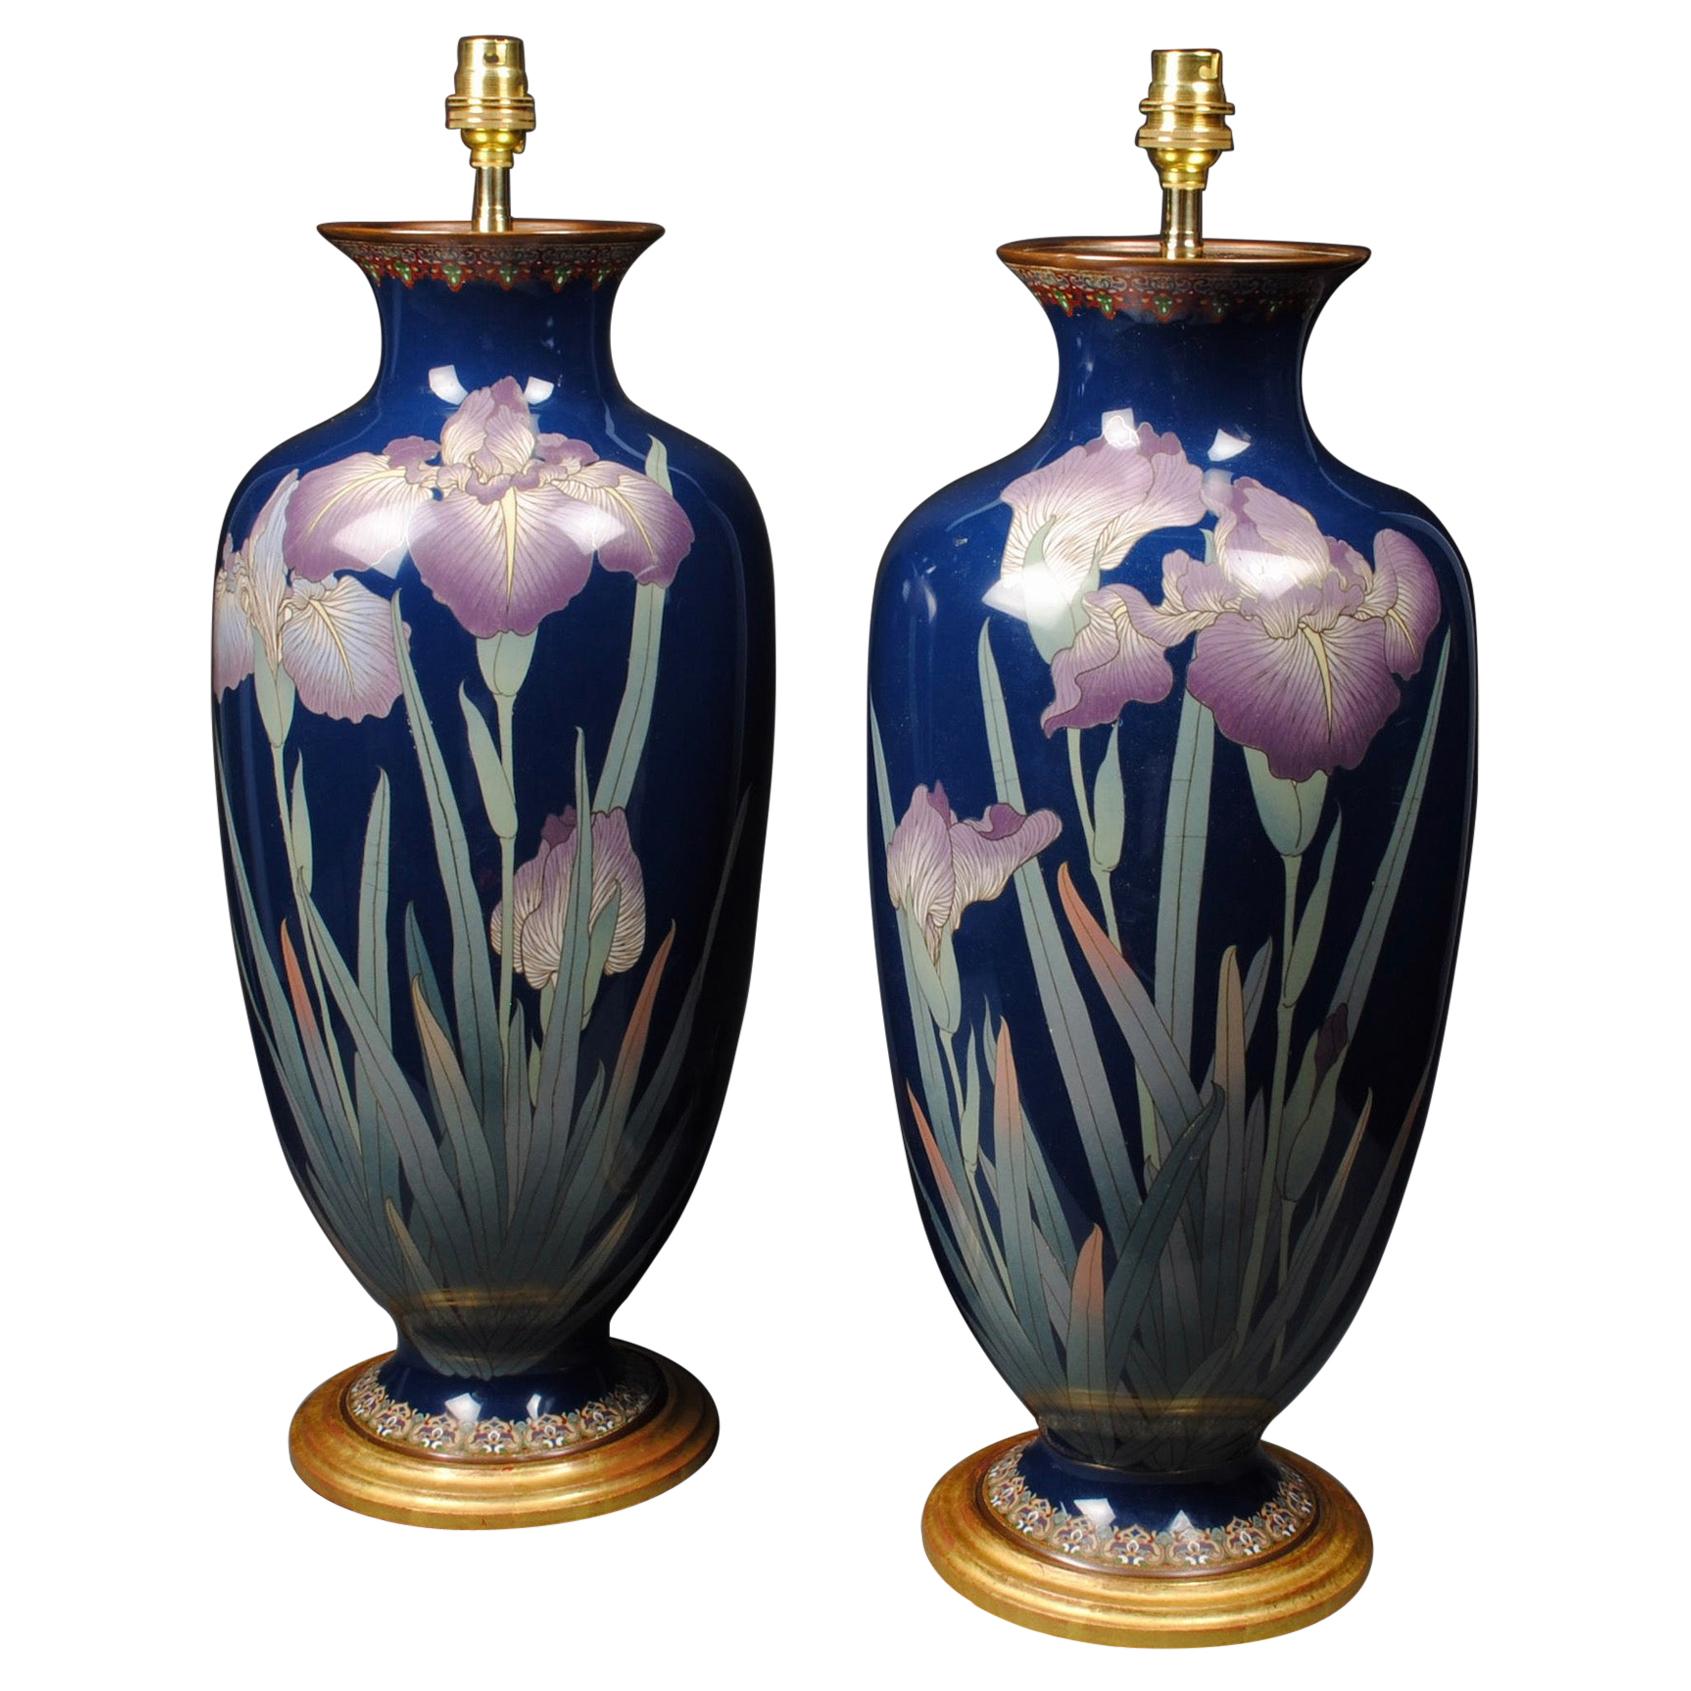 Pair of Japanese Cloisonné 19th Century Table Lamps